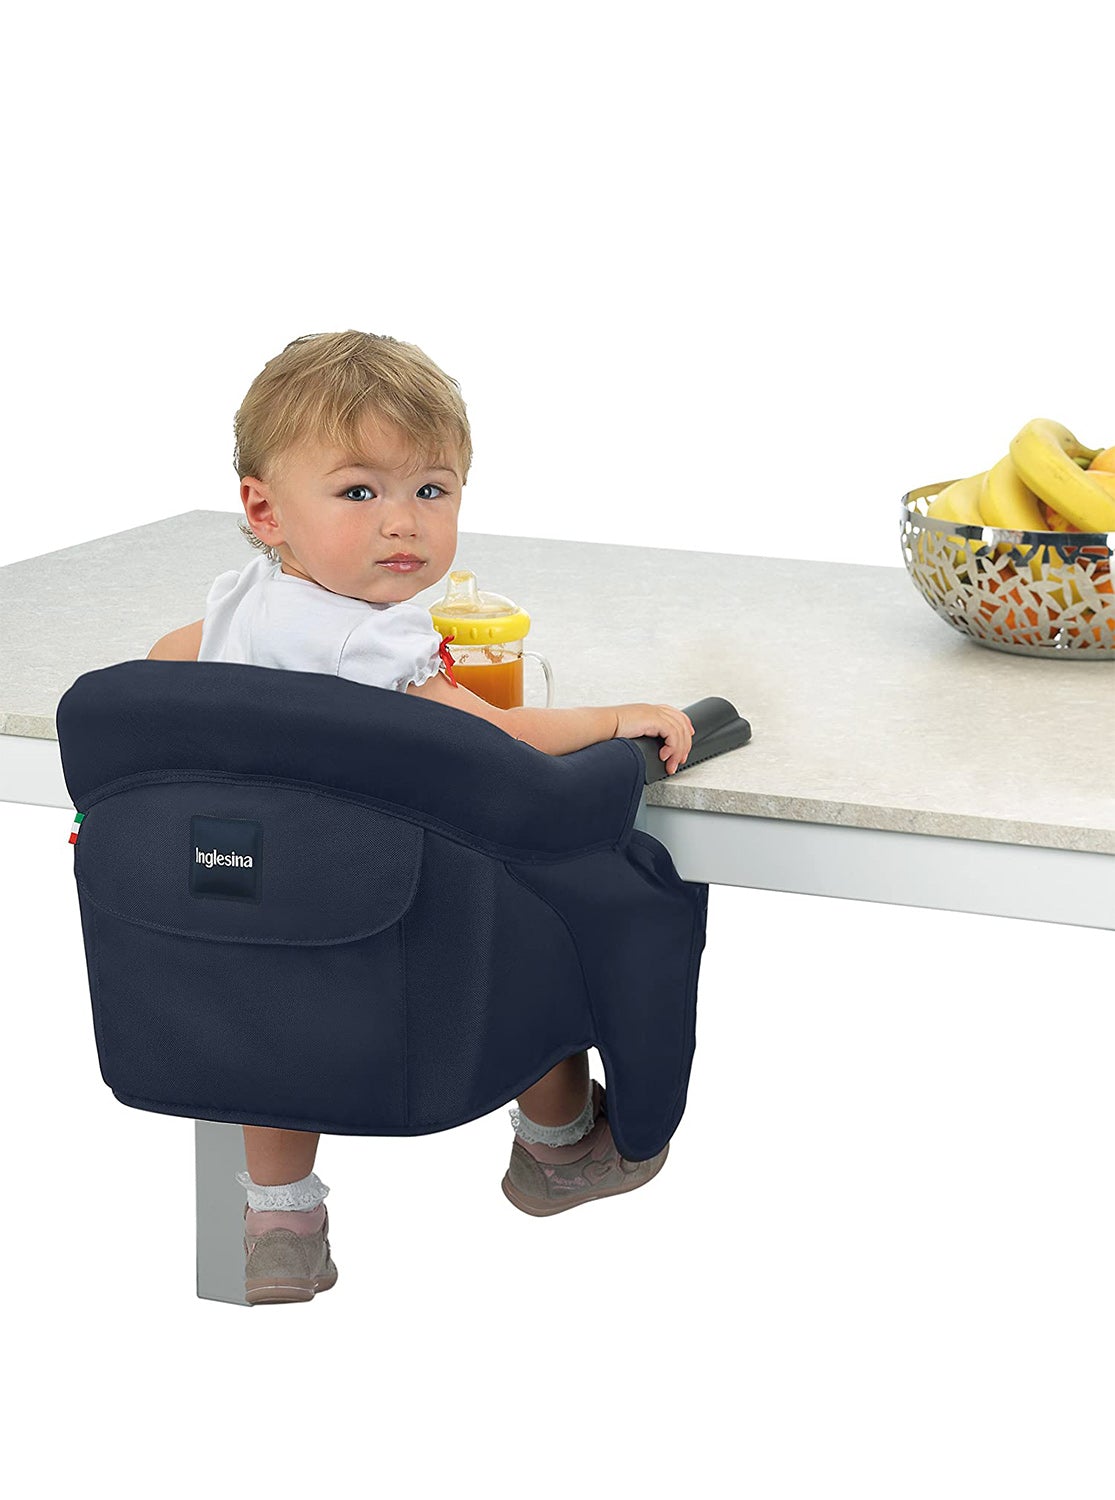 Inglesina Fast Table Chair - ANB Baby -$50 - $75